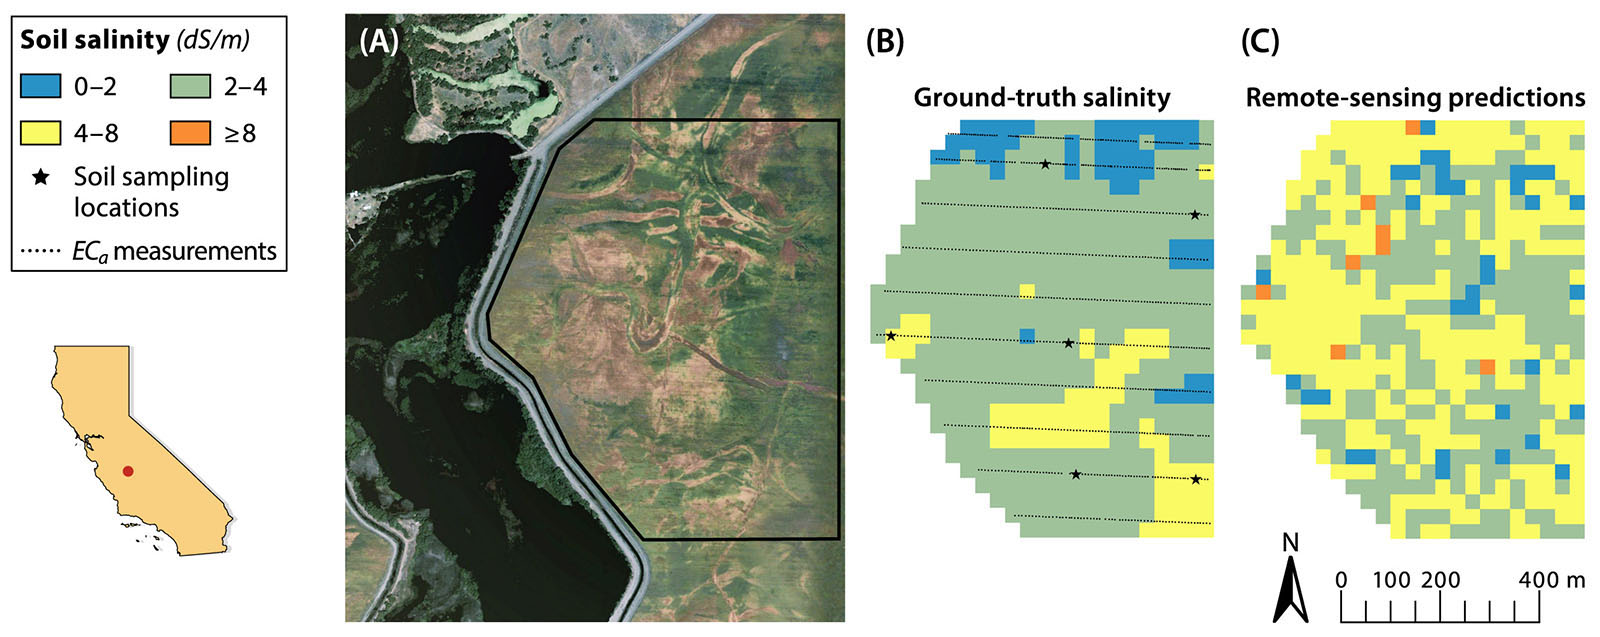 Example of inaccuracy of remote-sensing estimations in a heterogeneous field with lower salinity values: (A) National Aerial Imagery Program imagery at a test site in Stratford (Kings County) on July 8, 2003; (B) ground-truth root zone (0 to 4 feet) salinity measured by Scudiero et al. (2014) through apparent electrical conductivity (ECa) measurements and soil sampling; and (C) remote-sensing salinity estimations.